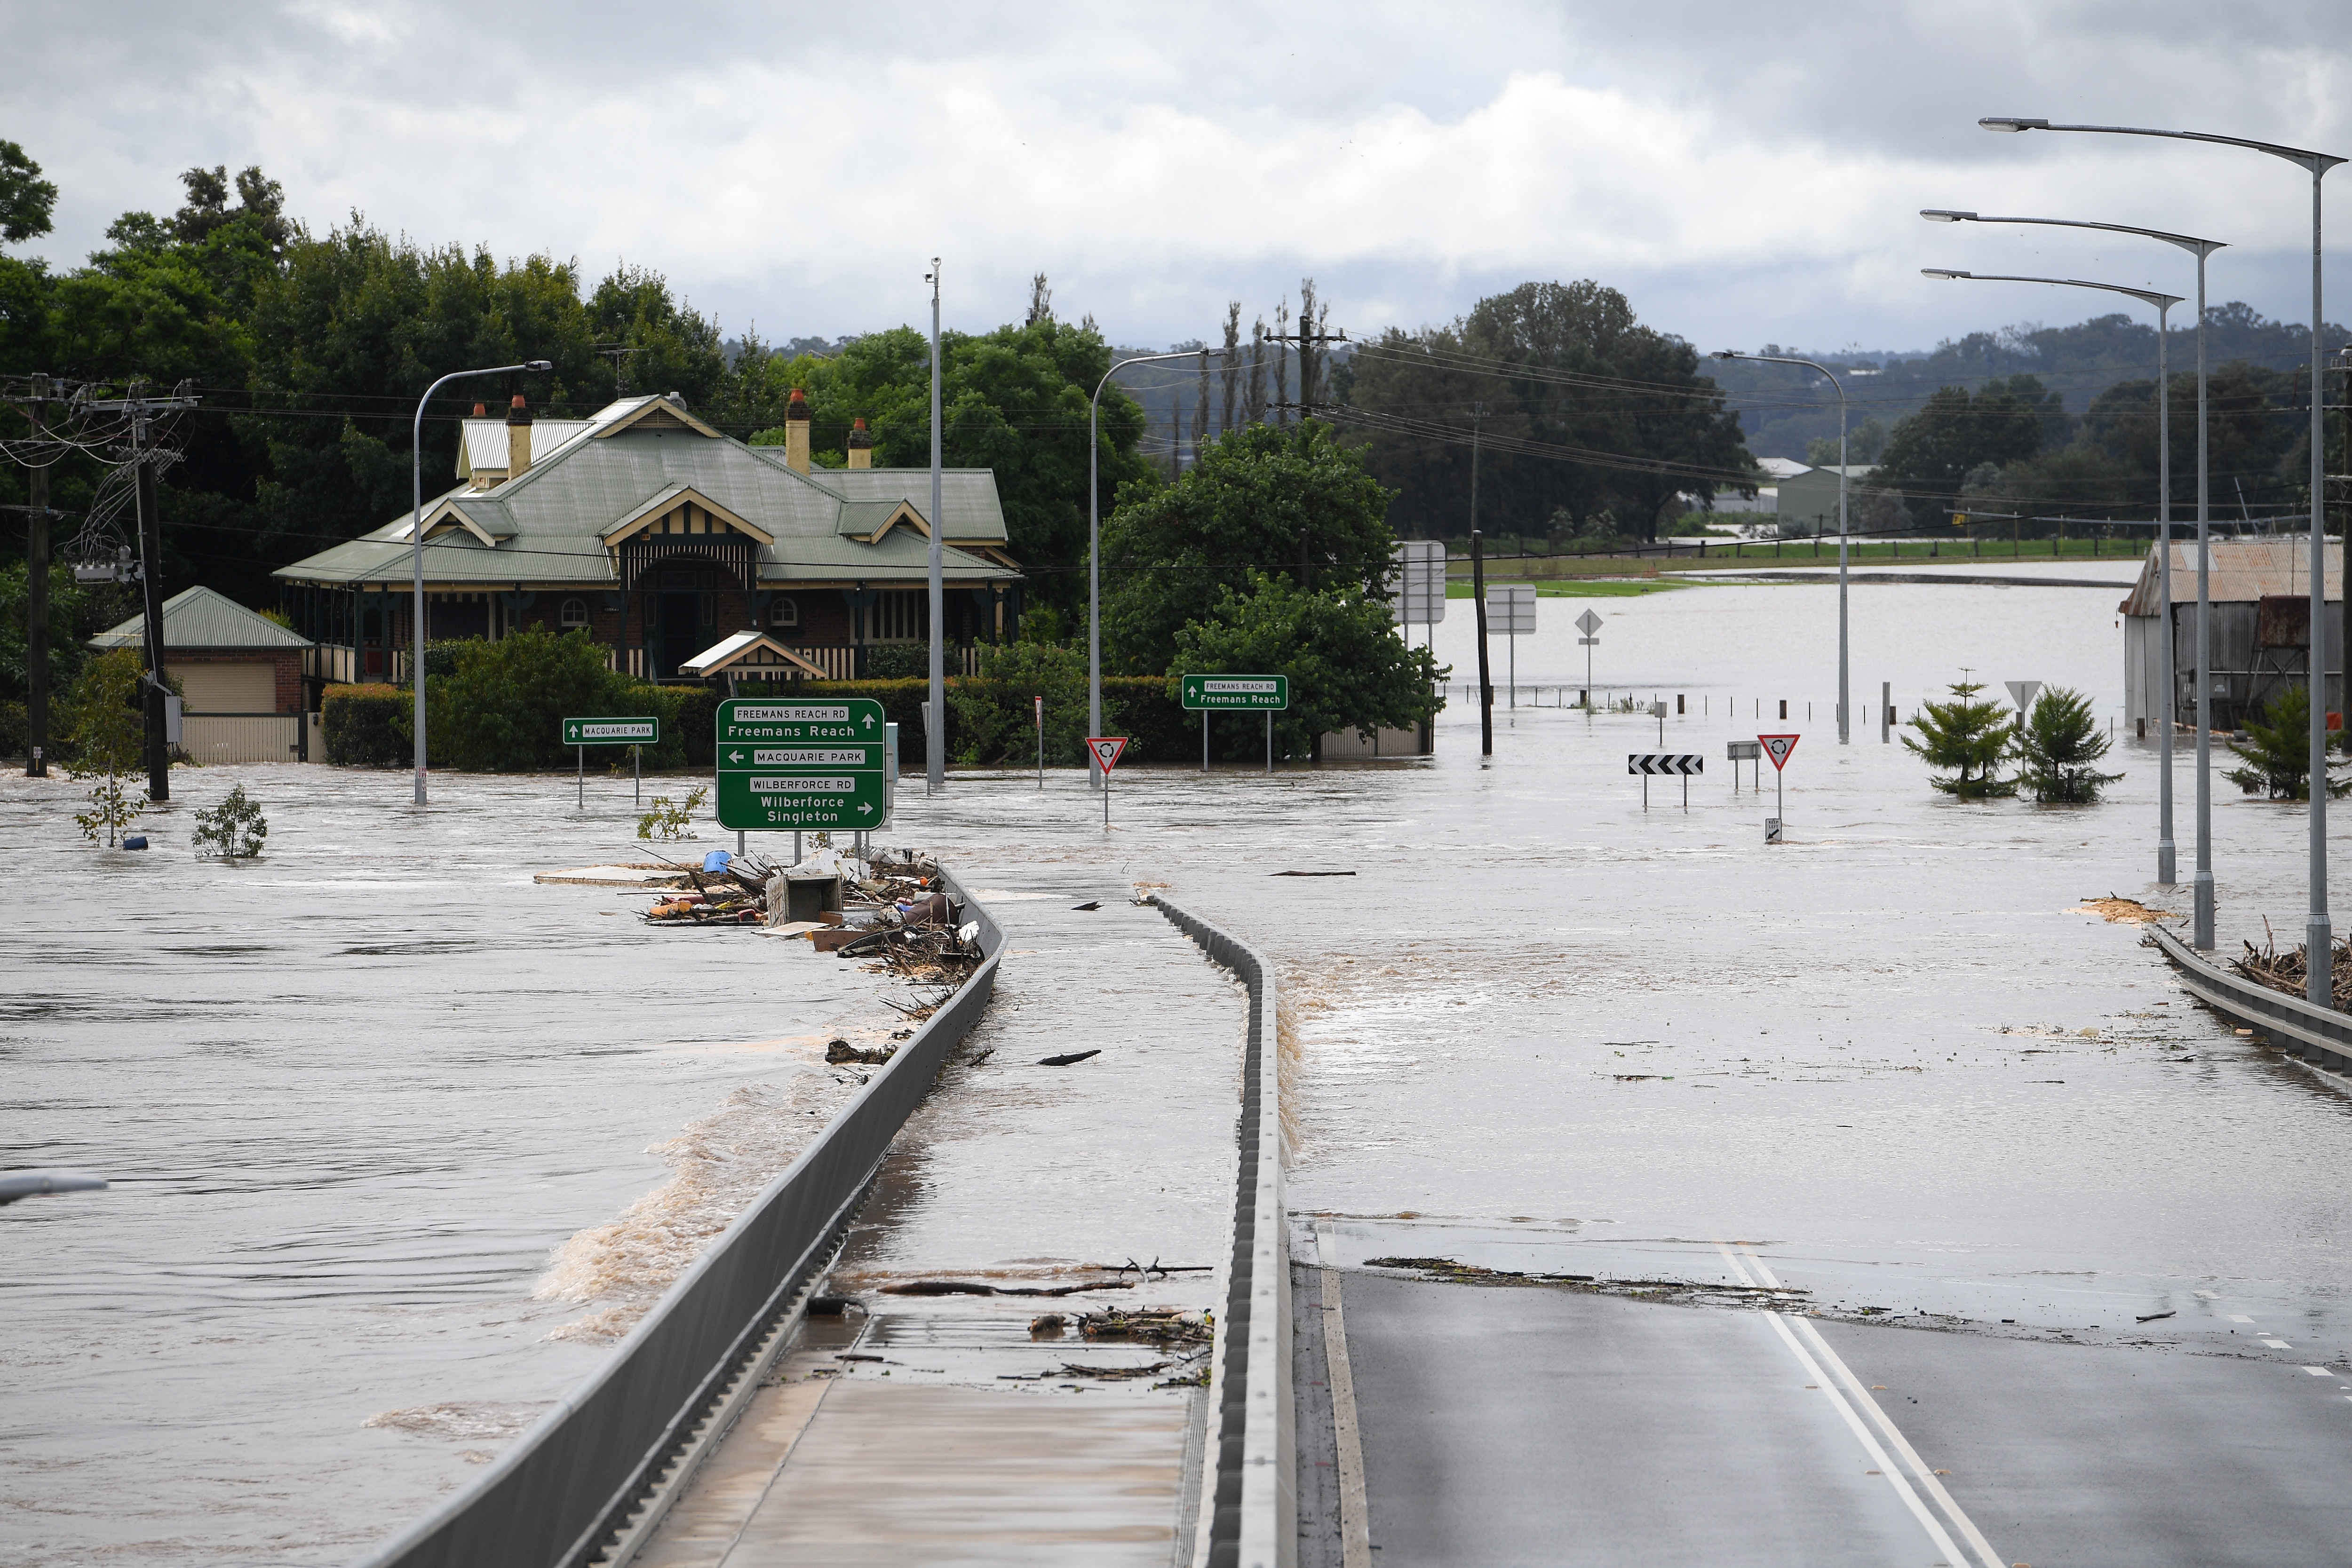 NSW and Queensland floods claimed 13 lives and damaged thousands of homes and businesses